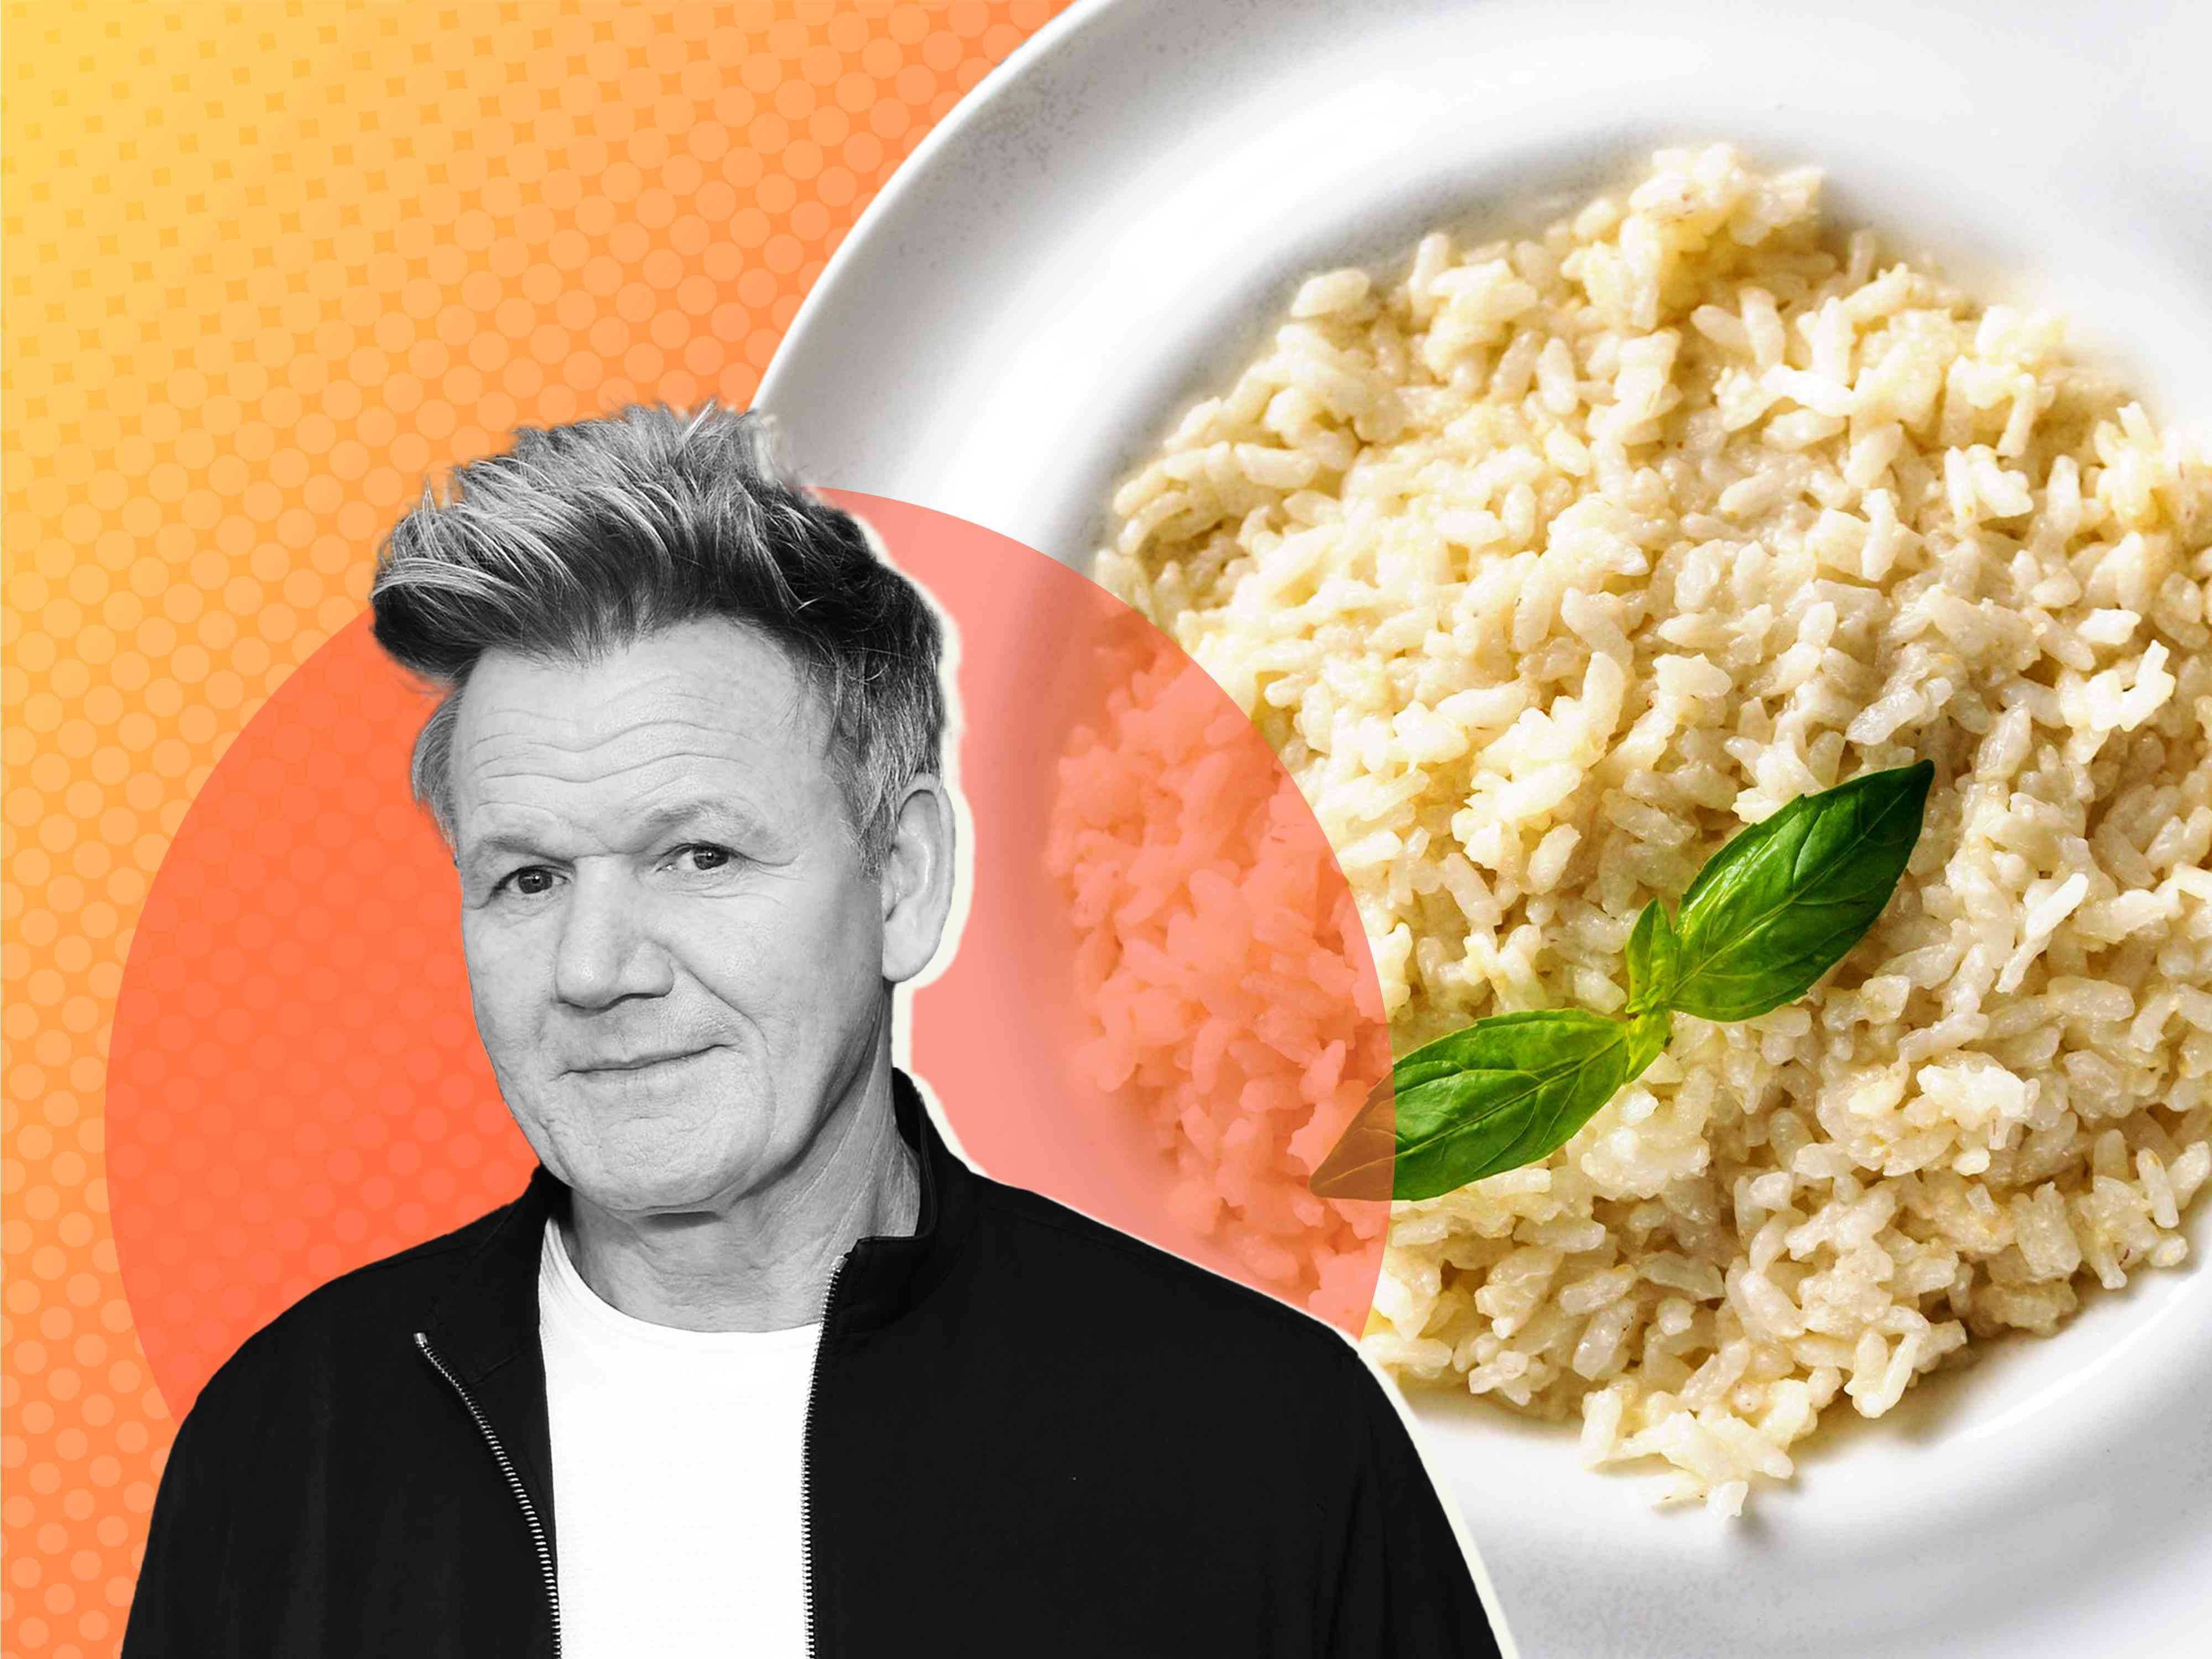 Gordon Ramsay’s One-Pot Comfort Dish Is My Final Meal Request